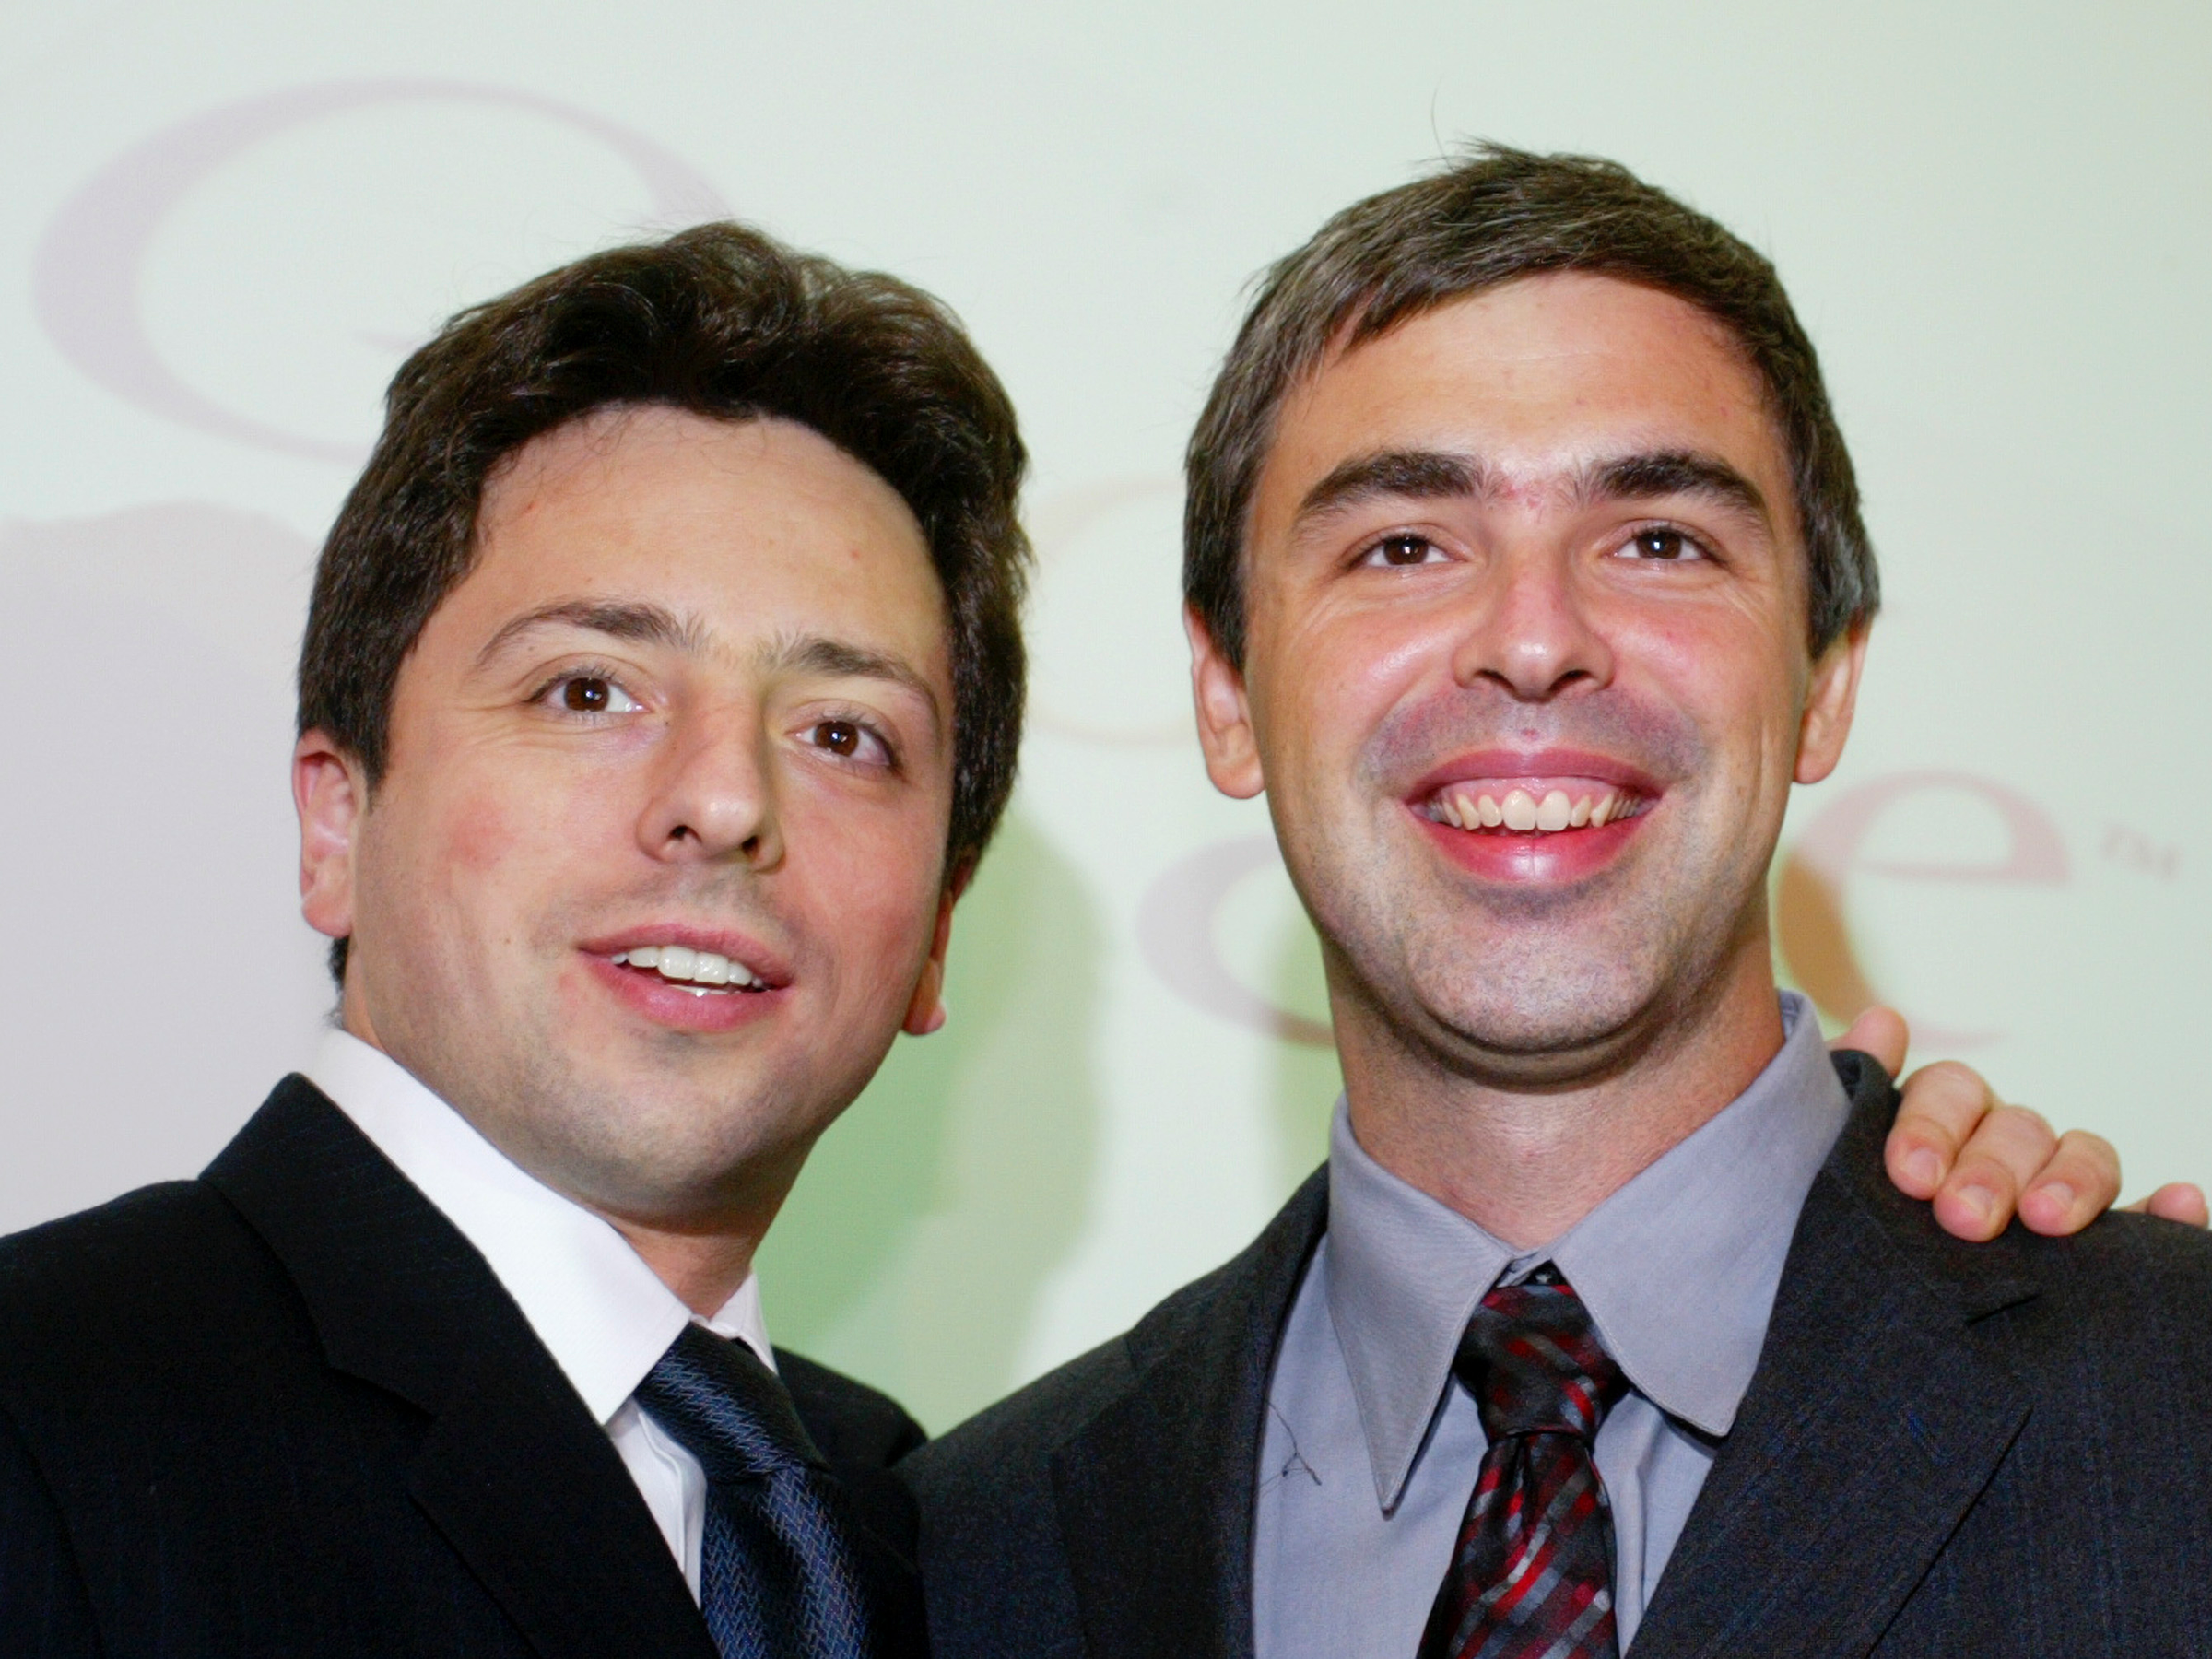 Google cofounders Larry Page and Sergey Brin are worth more than